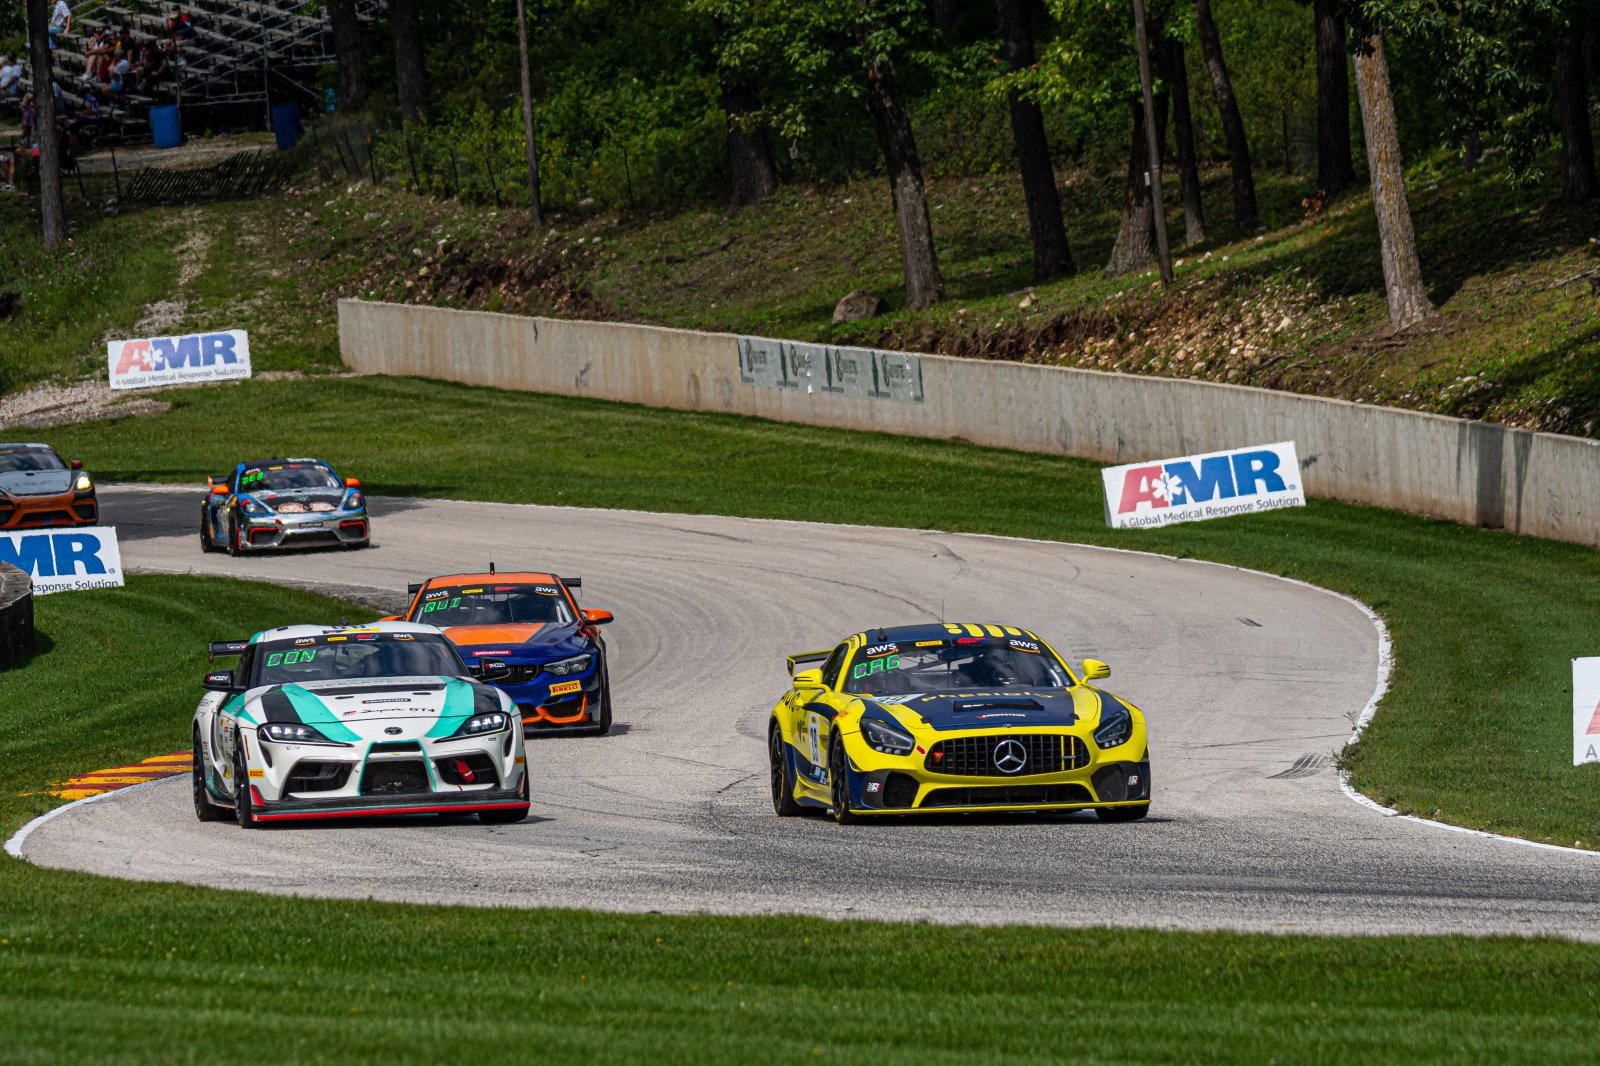 #39 Mercedes-AMG GT4 of Chris Cagnazzi and Guy Cosmo, RENNtech Motorsports, Pro-Am, Pirelli GT4 America, SRO America, Road America, Elkhart Lake, Aug 2021.
